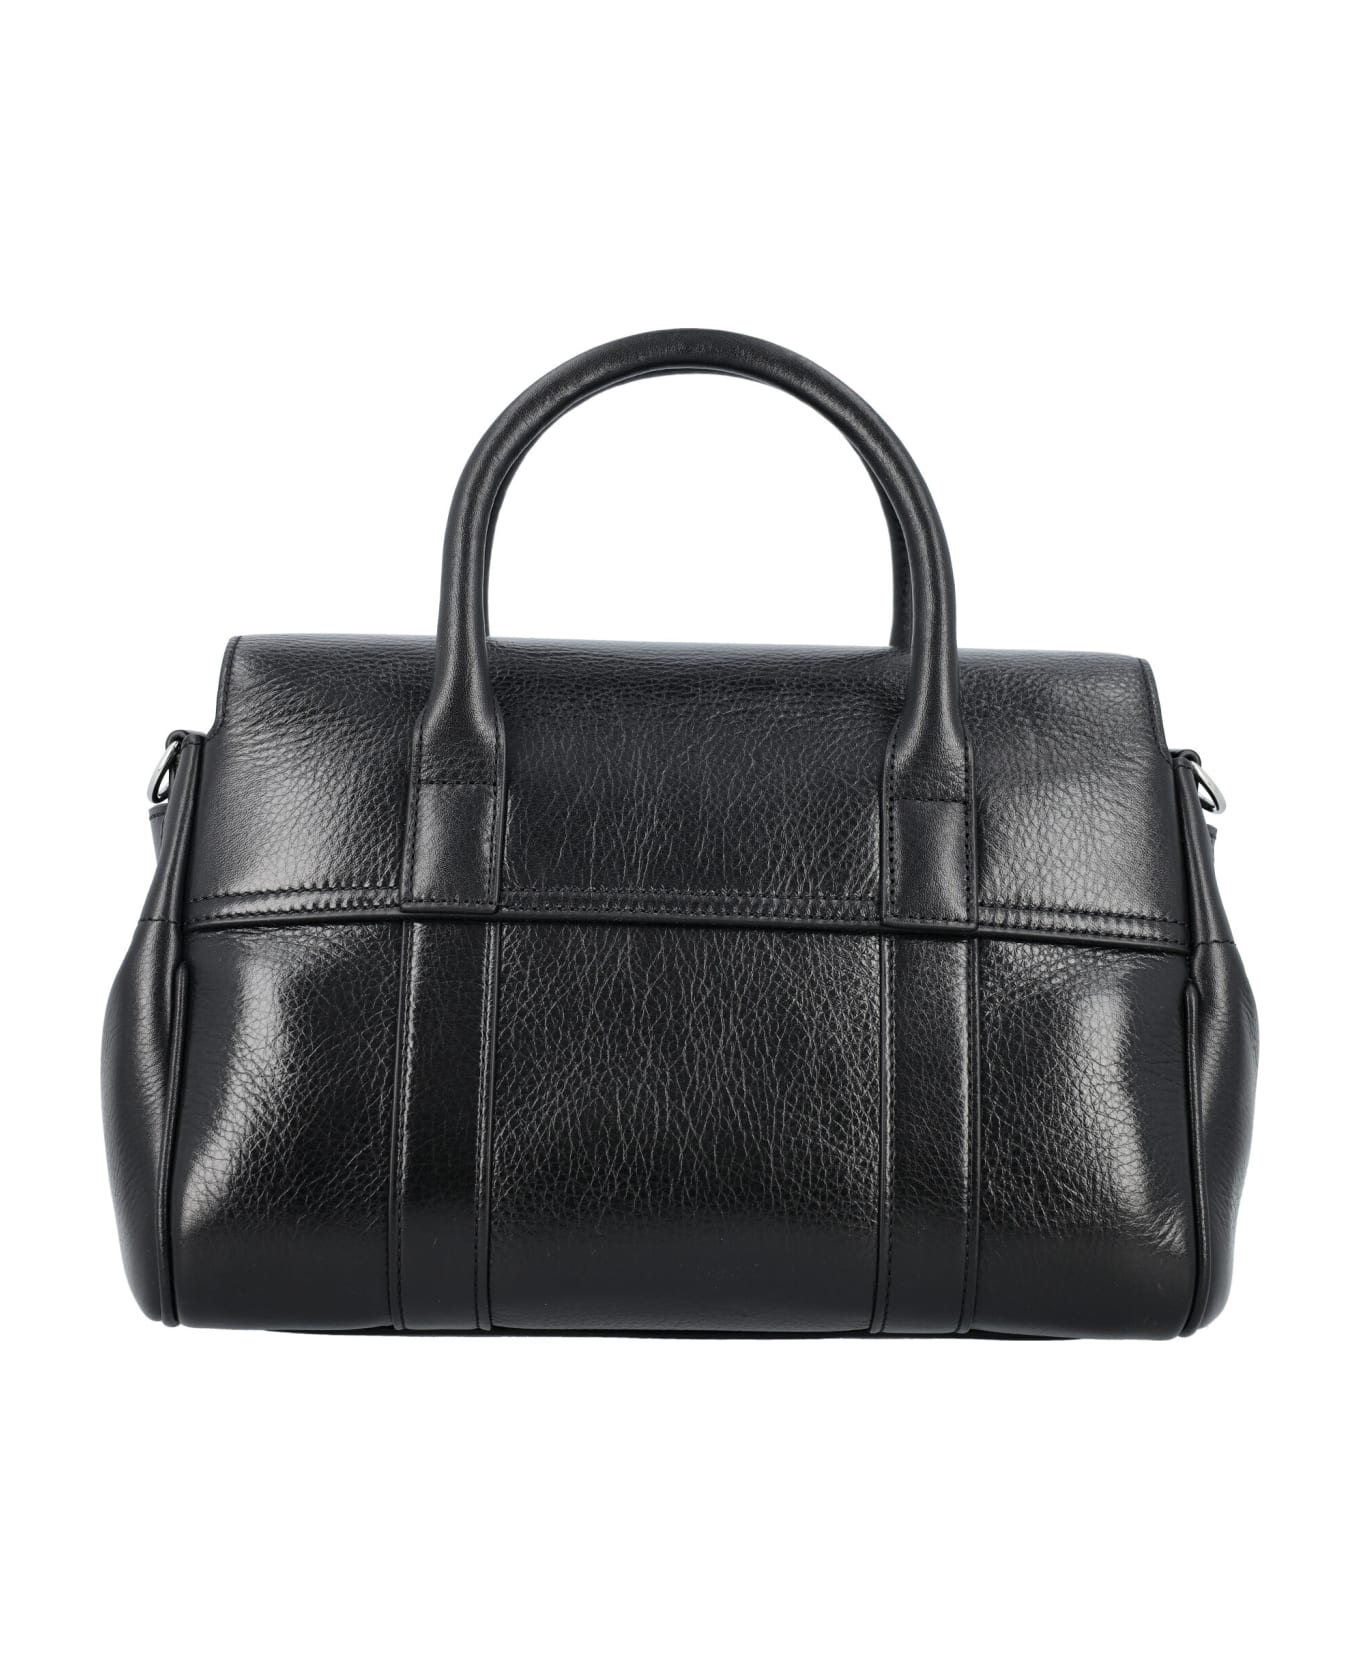 Mulberry Small Bayswater Satchel Bag - BLACK トートバッグ